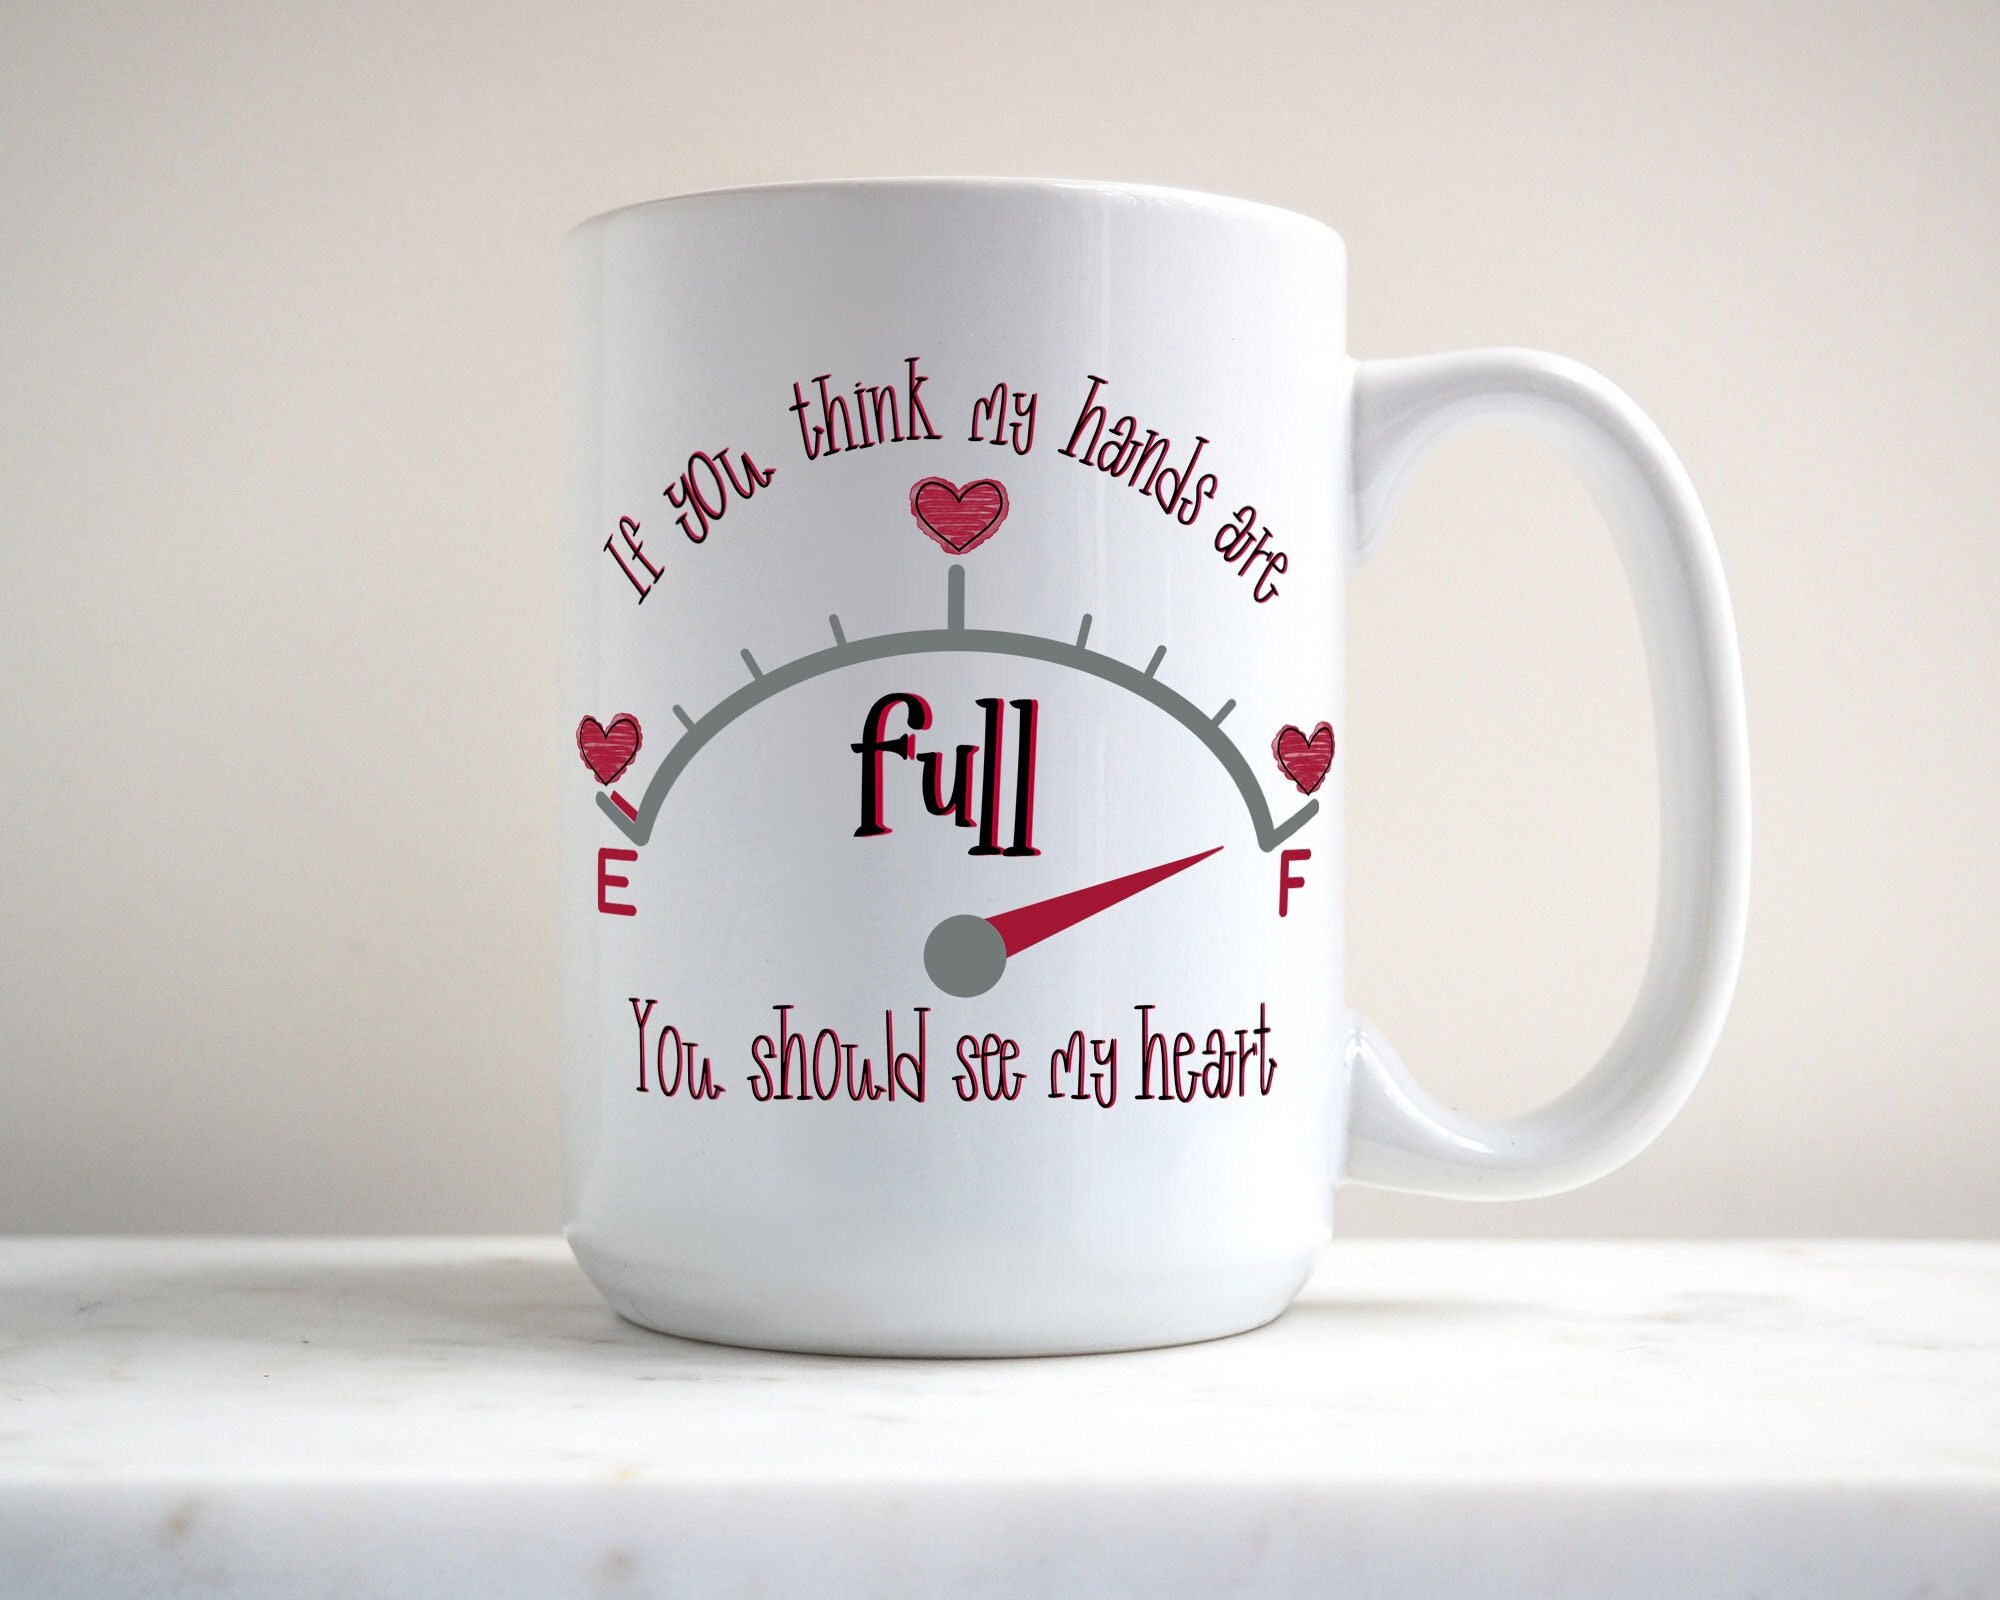 If You Think My Hands Are Gift Coffee Mug Clinical Psychologist Full Heart 